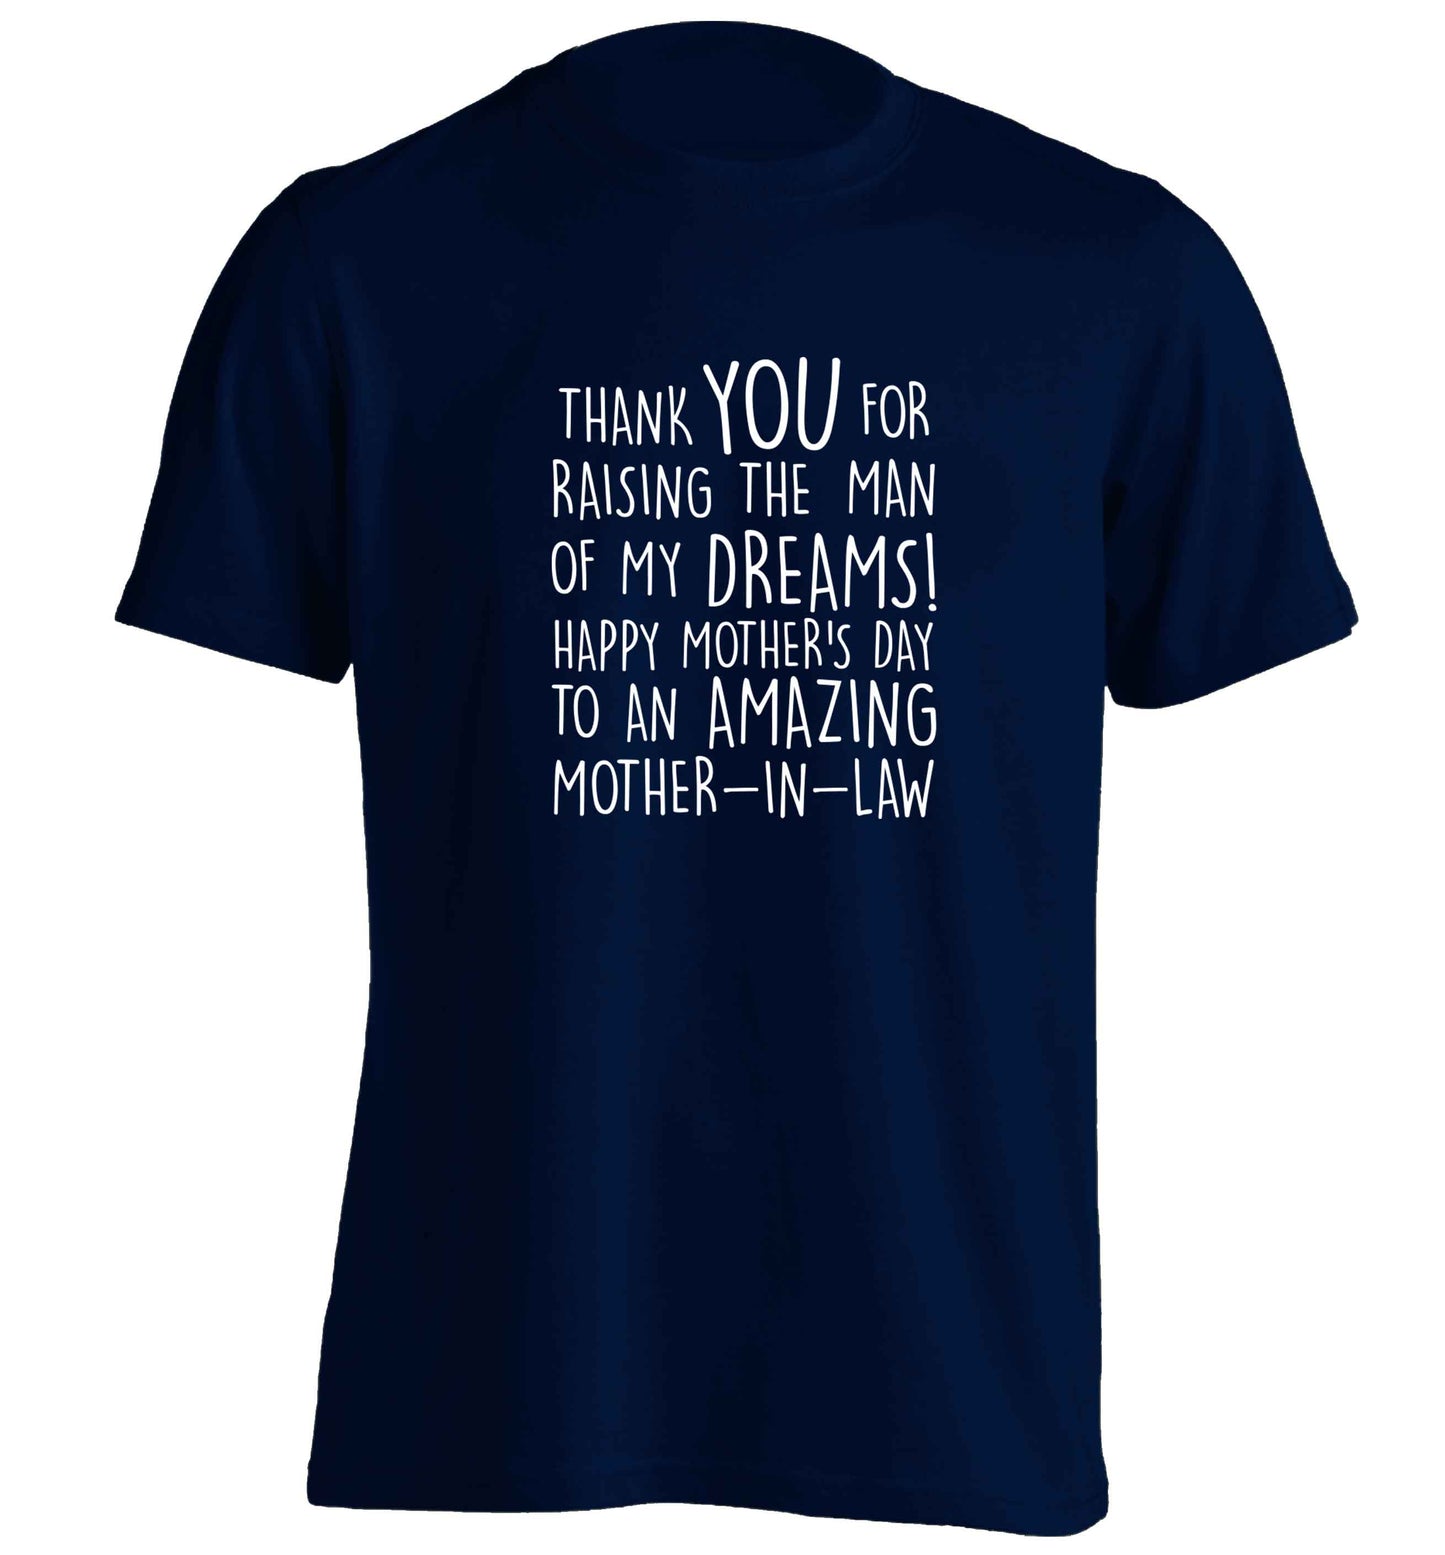 Raising the man of my dreams mother's day mother-in-law adults unisex navy Tshirt 2XL